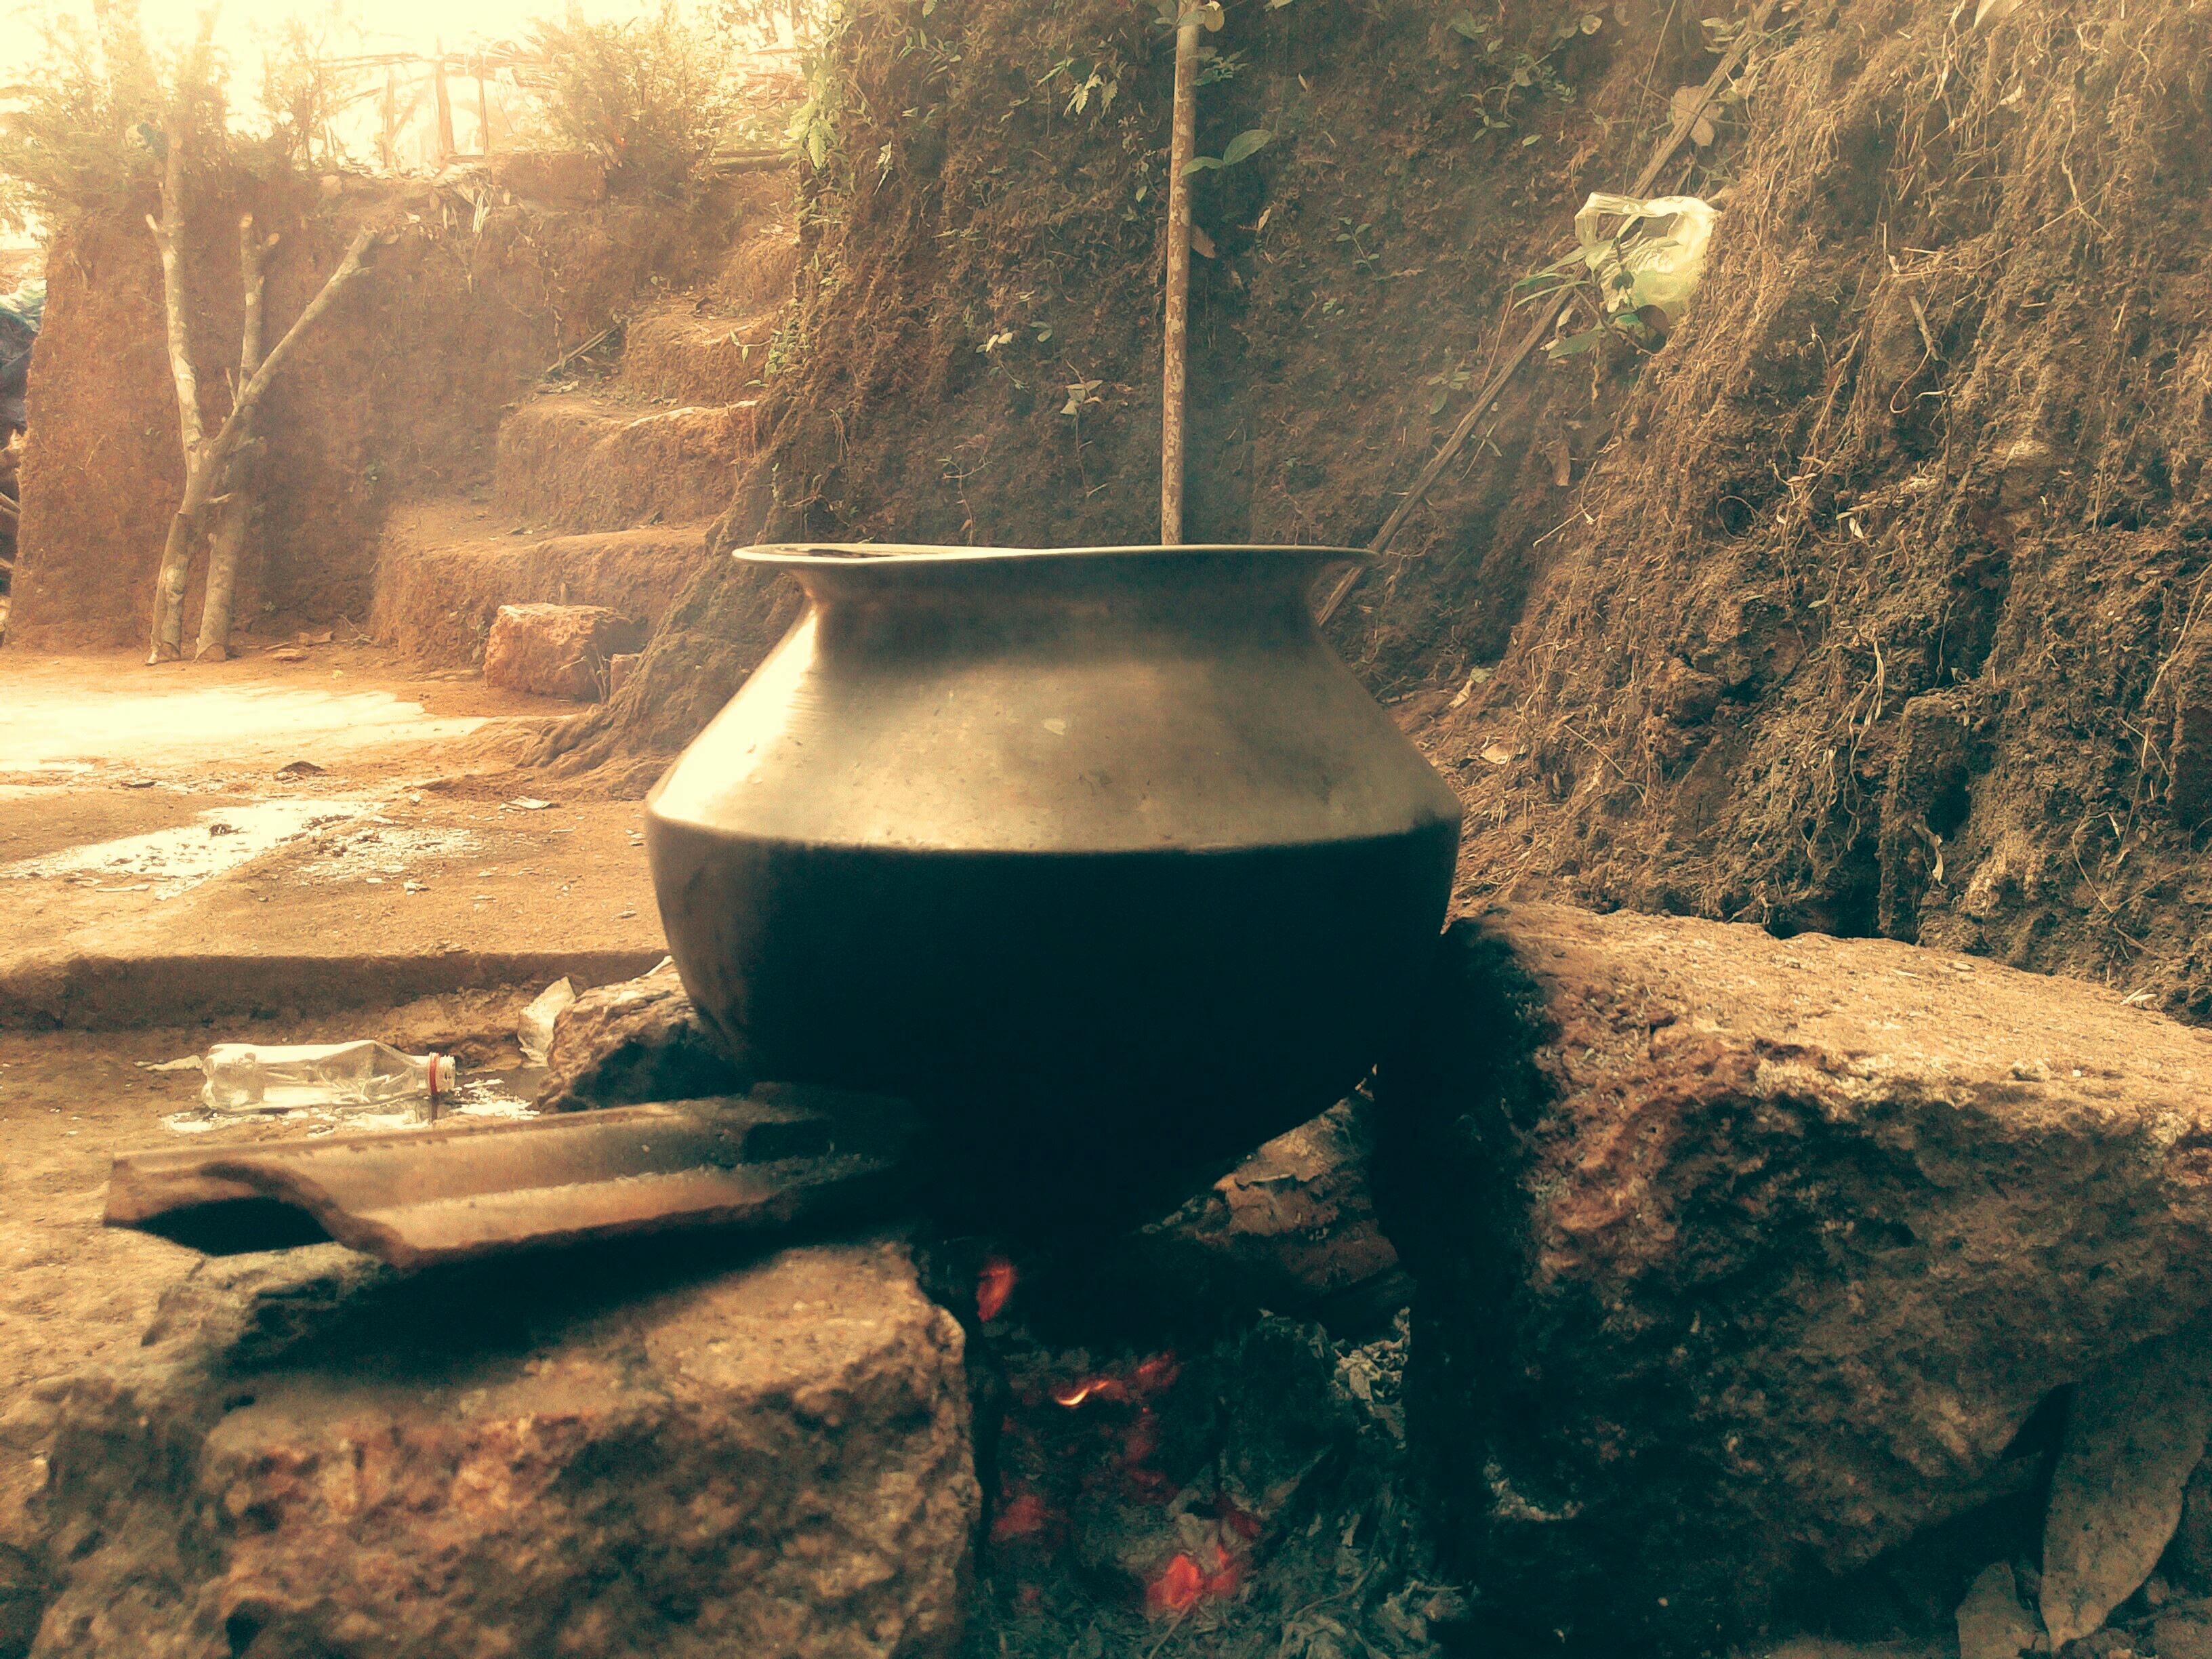 Free stock photo of cooking, cooking pot, indian village